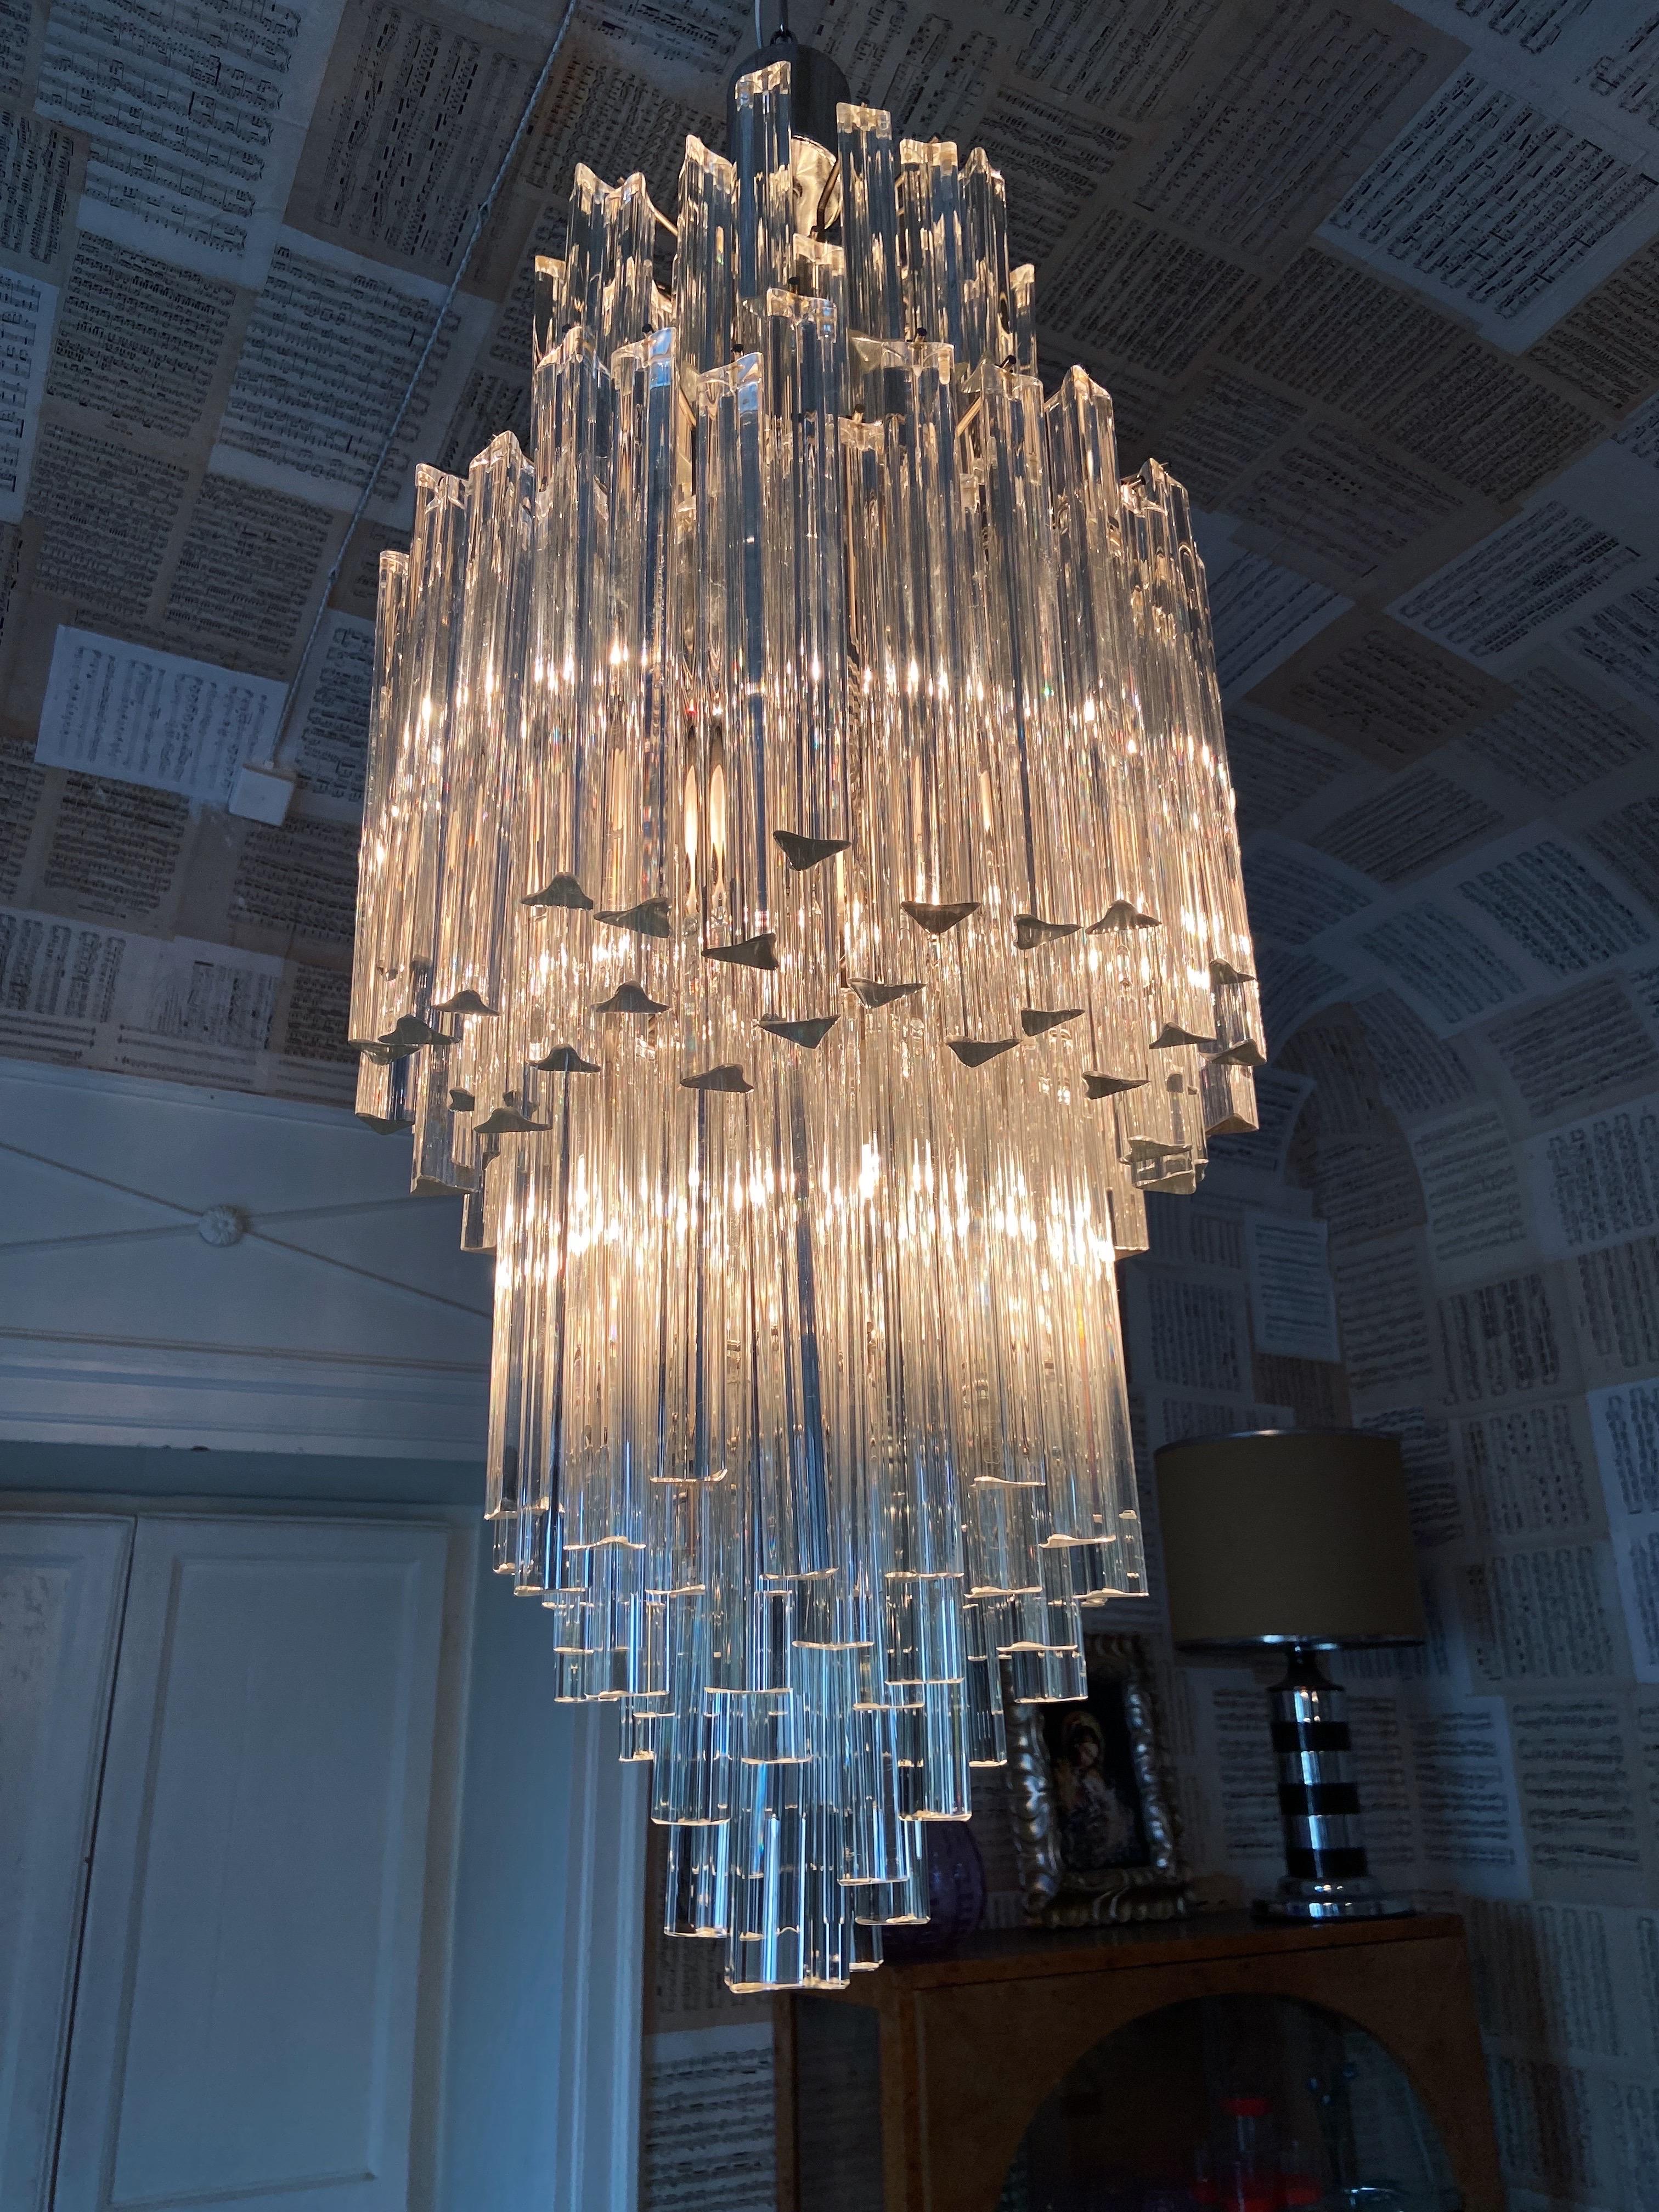 Mid-Century Modern XL Venini chandelier. The light consists 162 original Murano glass crystals on a metal base consisting of 3 tiers. A true jewel for your home.

Details
Creator: Venini, Murano
Dimensions: Height 110 cm Diameter: 45